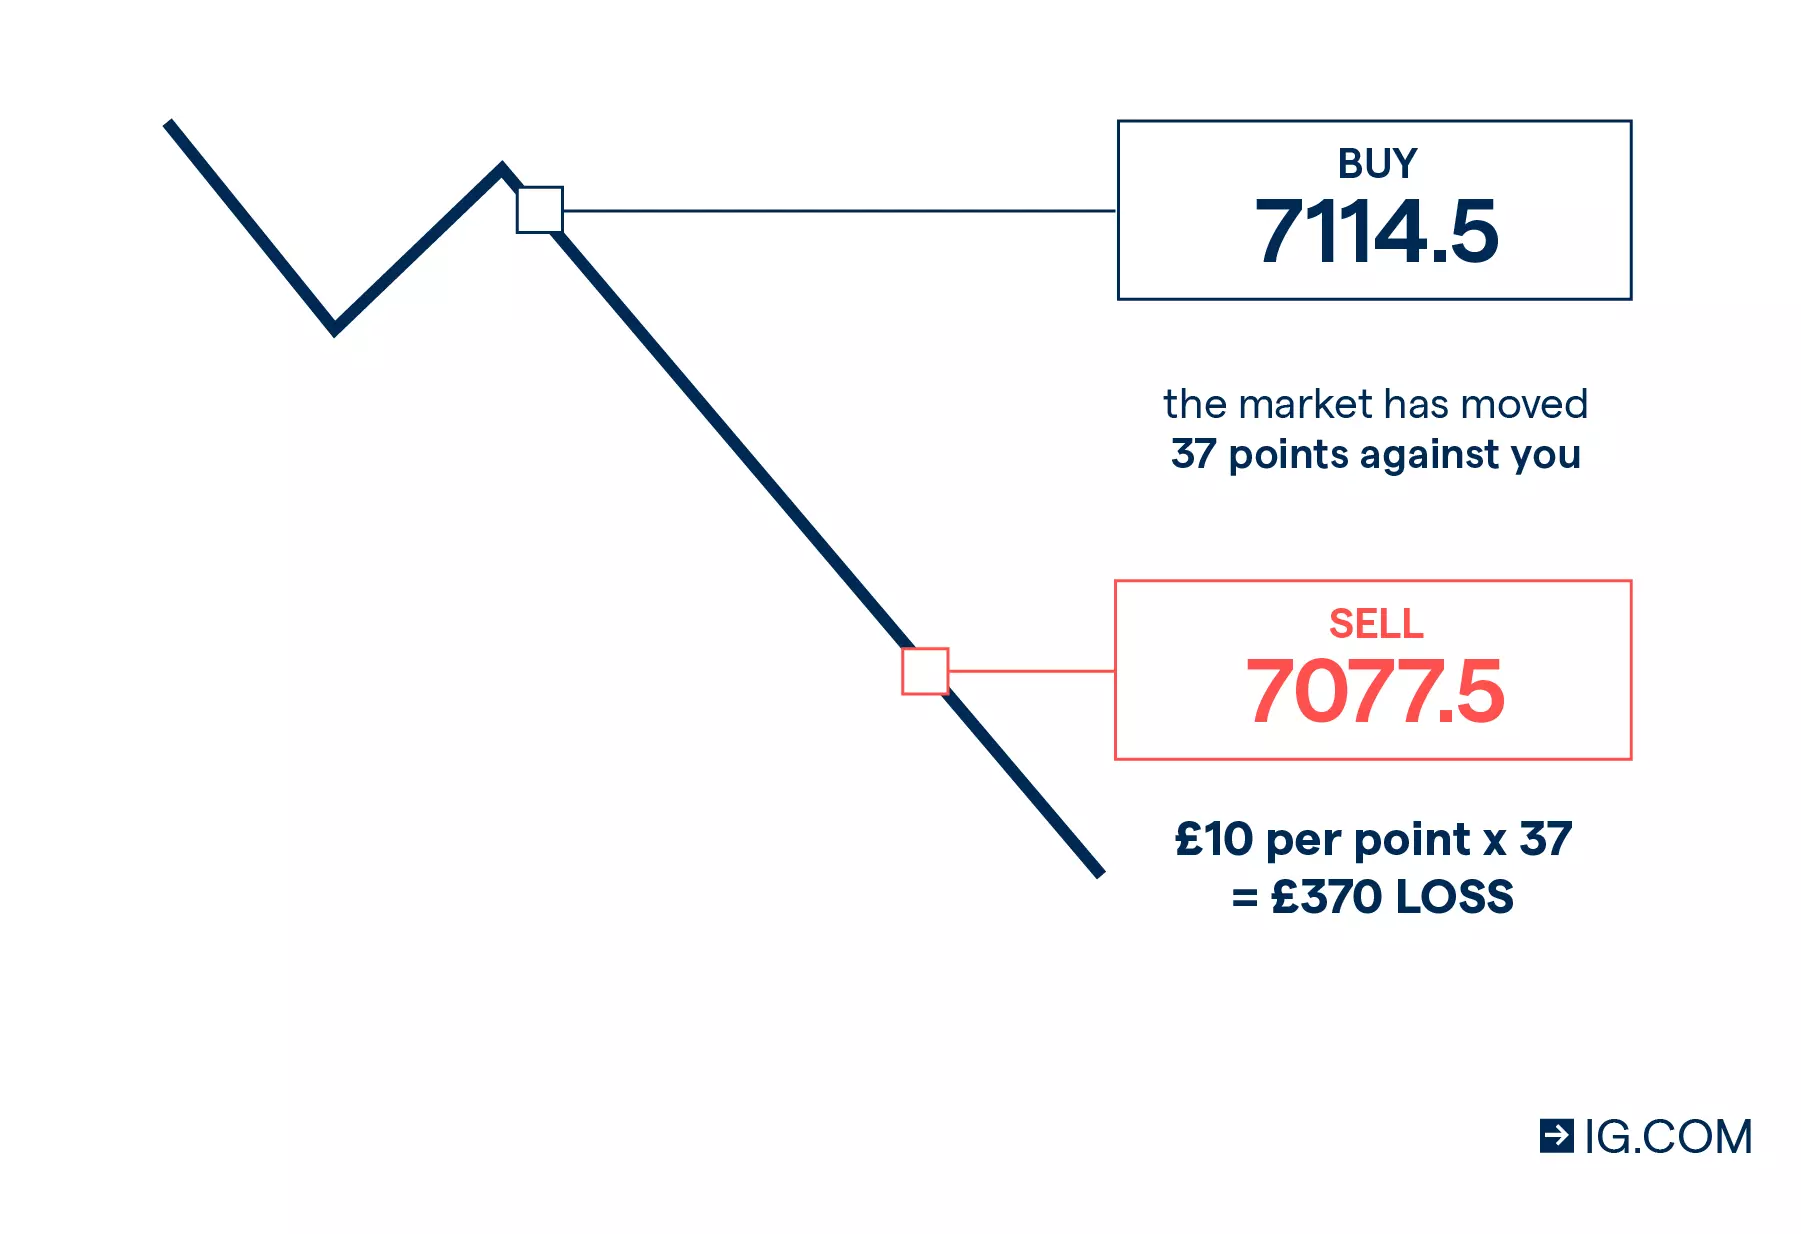 Spread betting on the FTSE 100 example